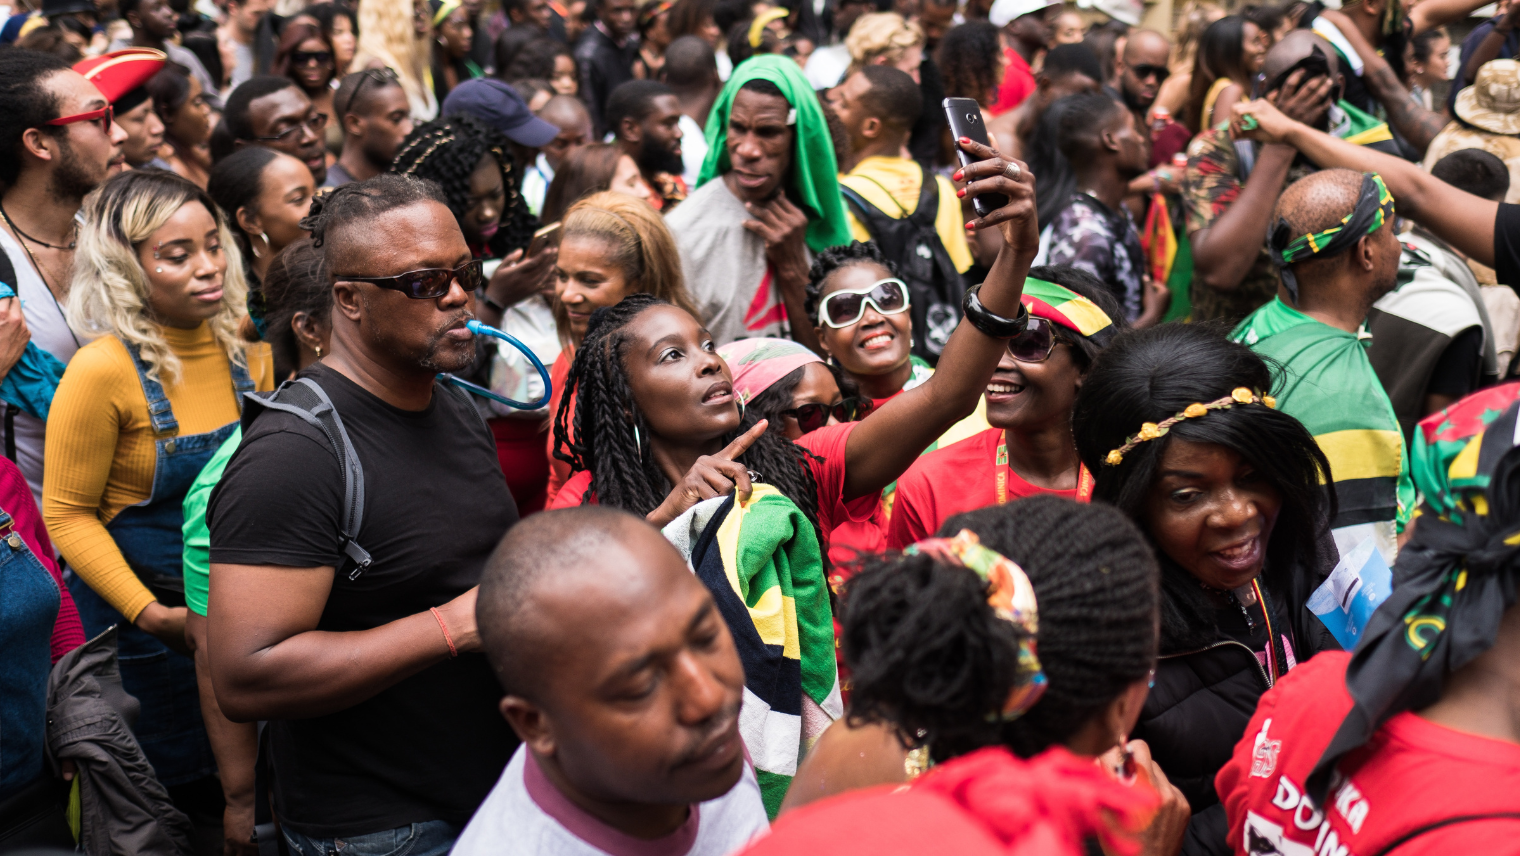 Image of a crowd at Notting Hill Carnival 